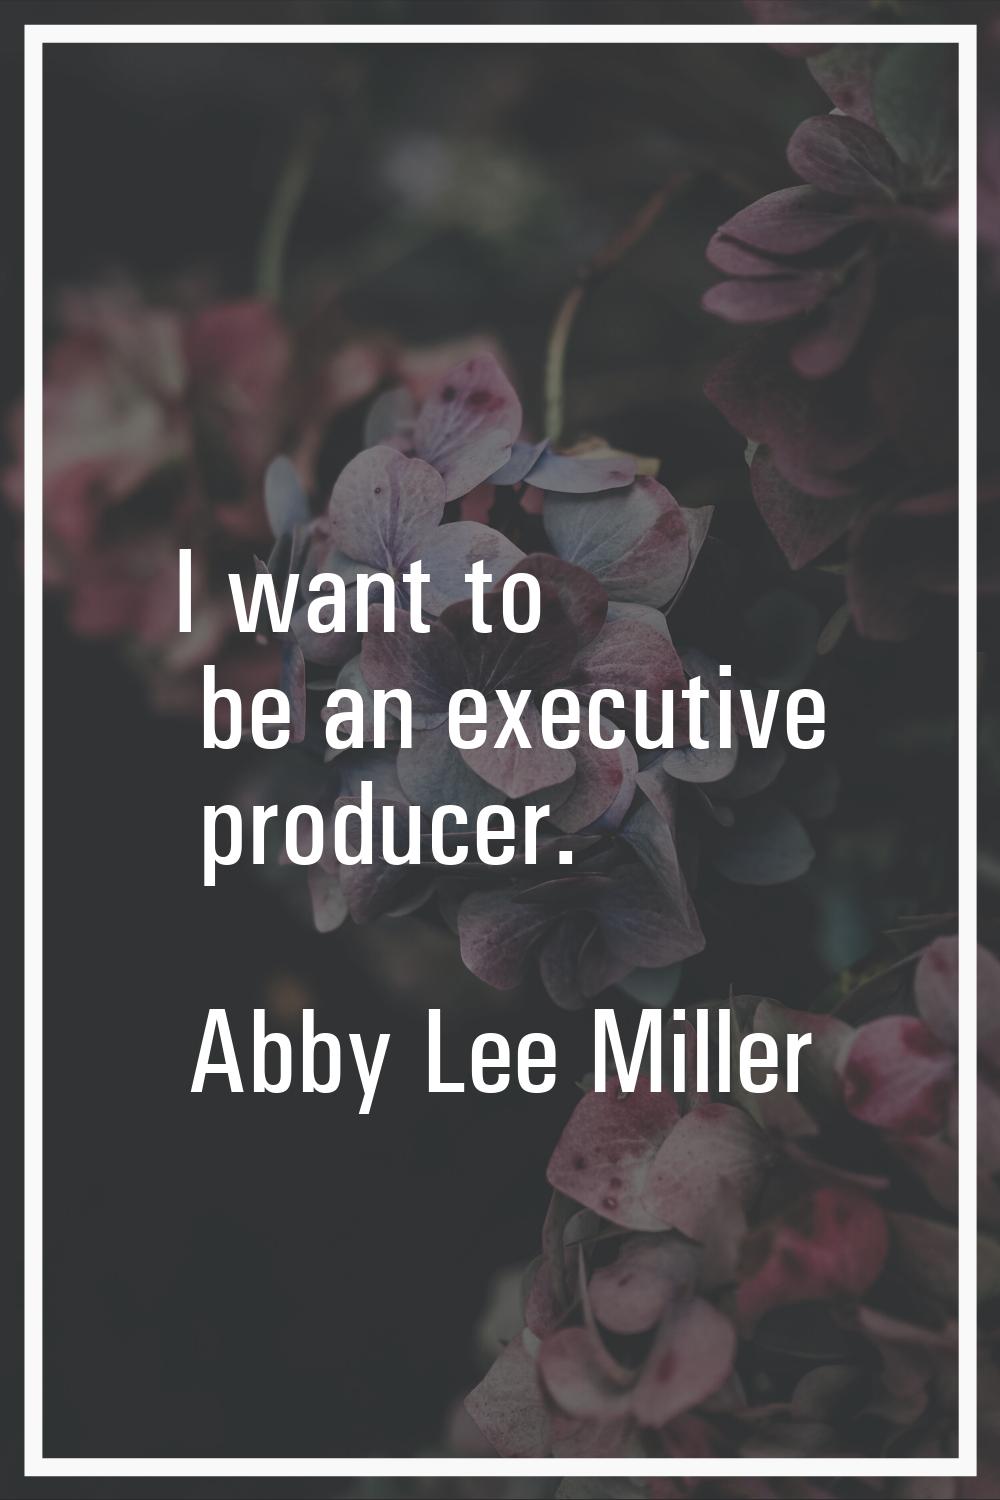 I want to be an executive producer.